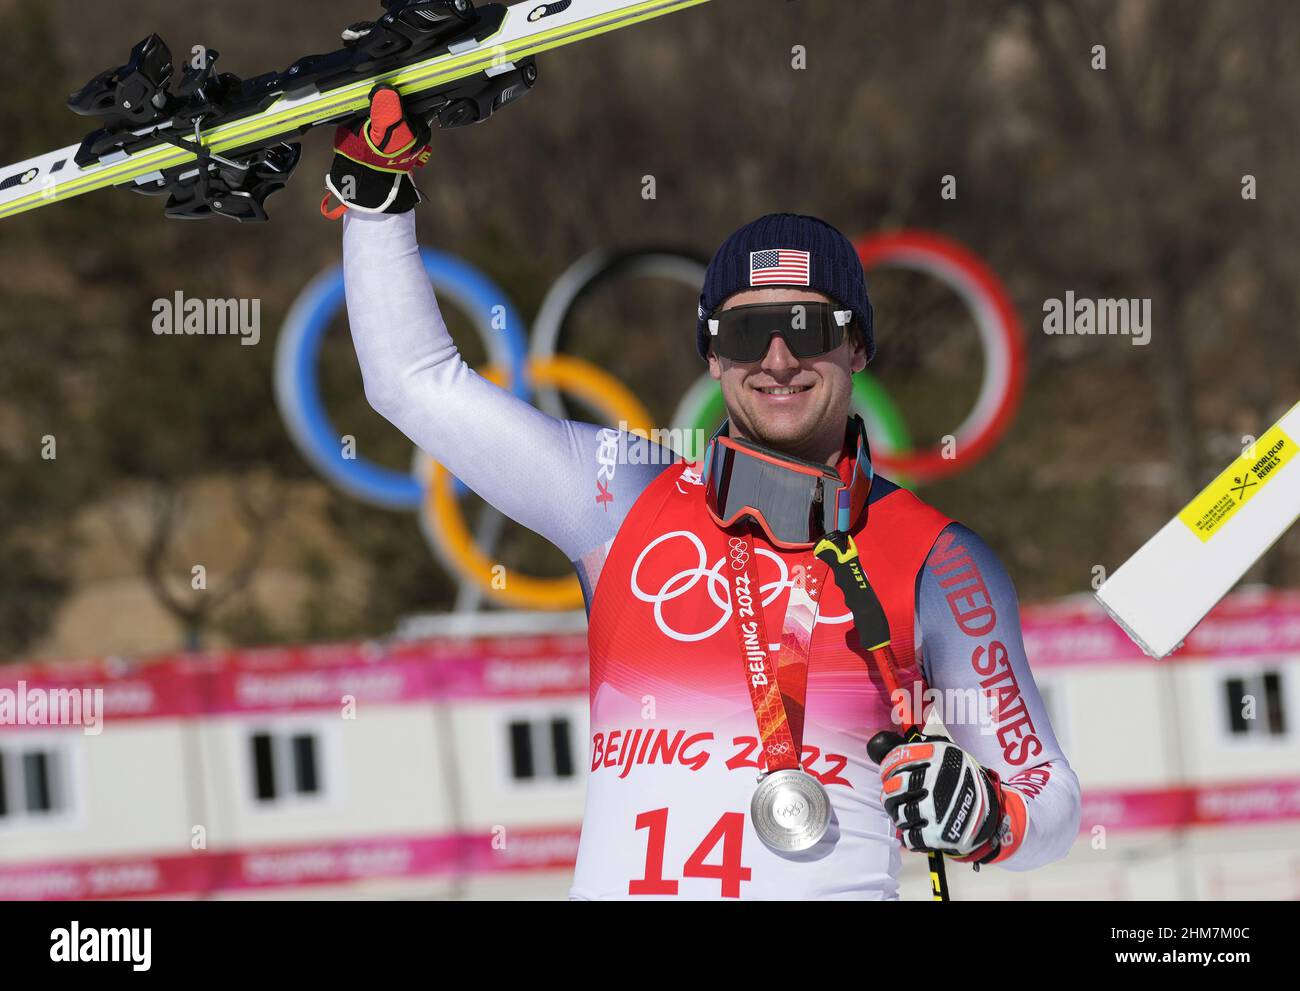 Beijing, China. 08th Feb, 2022. Ryan Cochran-Siegle, U.S., poses with his silver medal in men's Super-G at the Winter Olympics in Beijing on February 8, 2022. Cochran-Siegle was only four hundredths of second behind the winner of the race, Matthias Mayer of Austria. Photo by Rick T. Wilking/UPI Credit: UPI/Alamy Live News Stock Photo